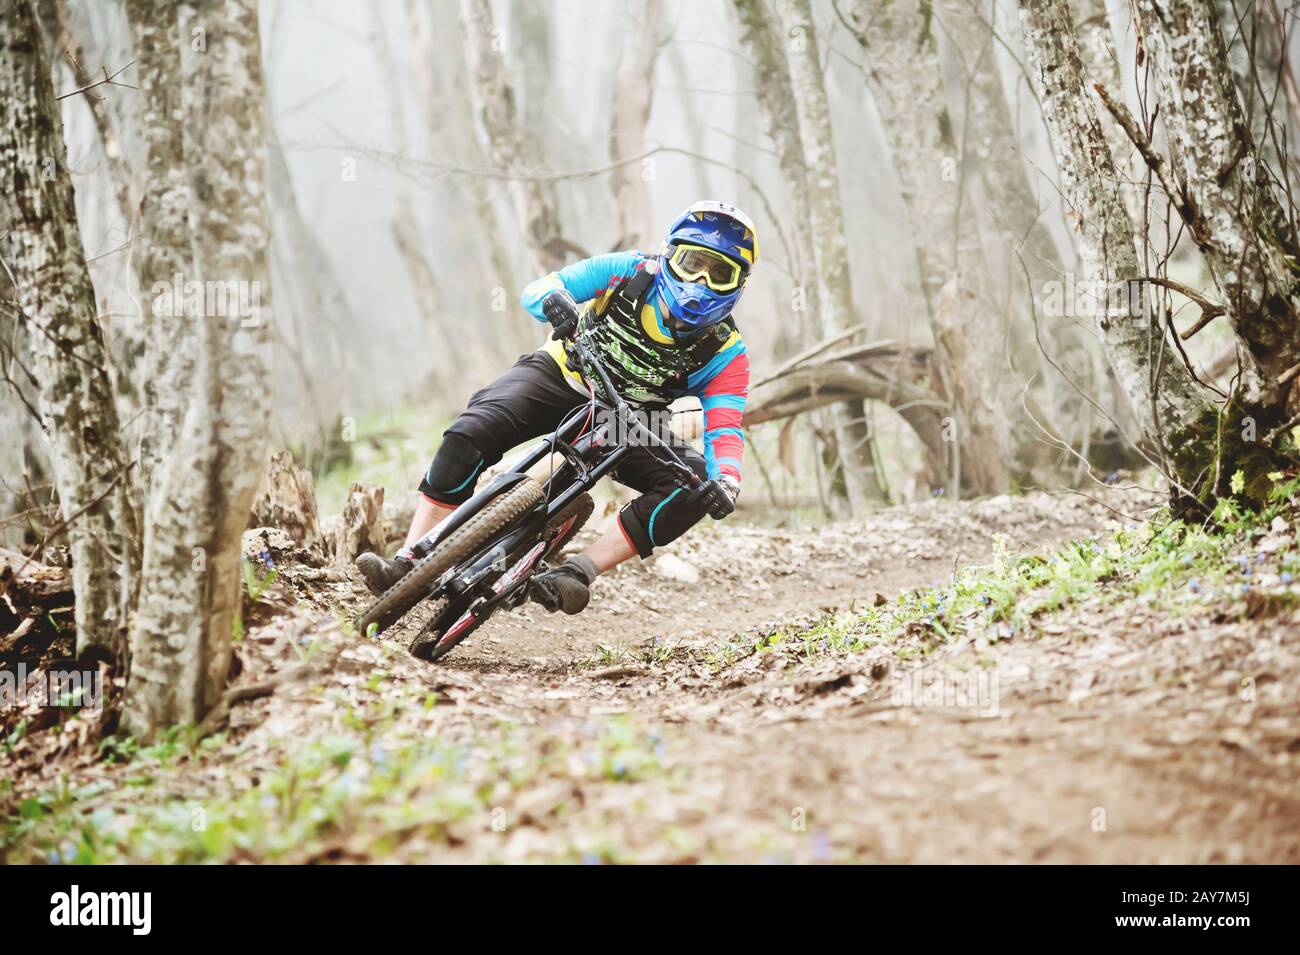 The rider in the full-face helmet passes a counter-rotation in the glide against the background of a misty forest. Stock Photo